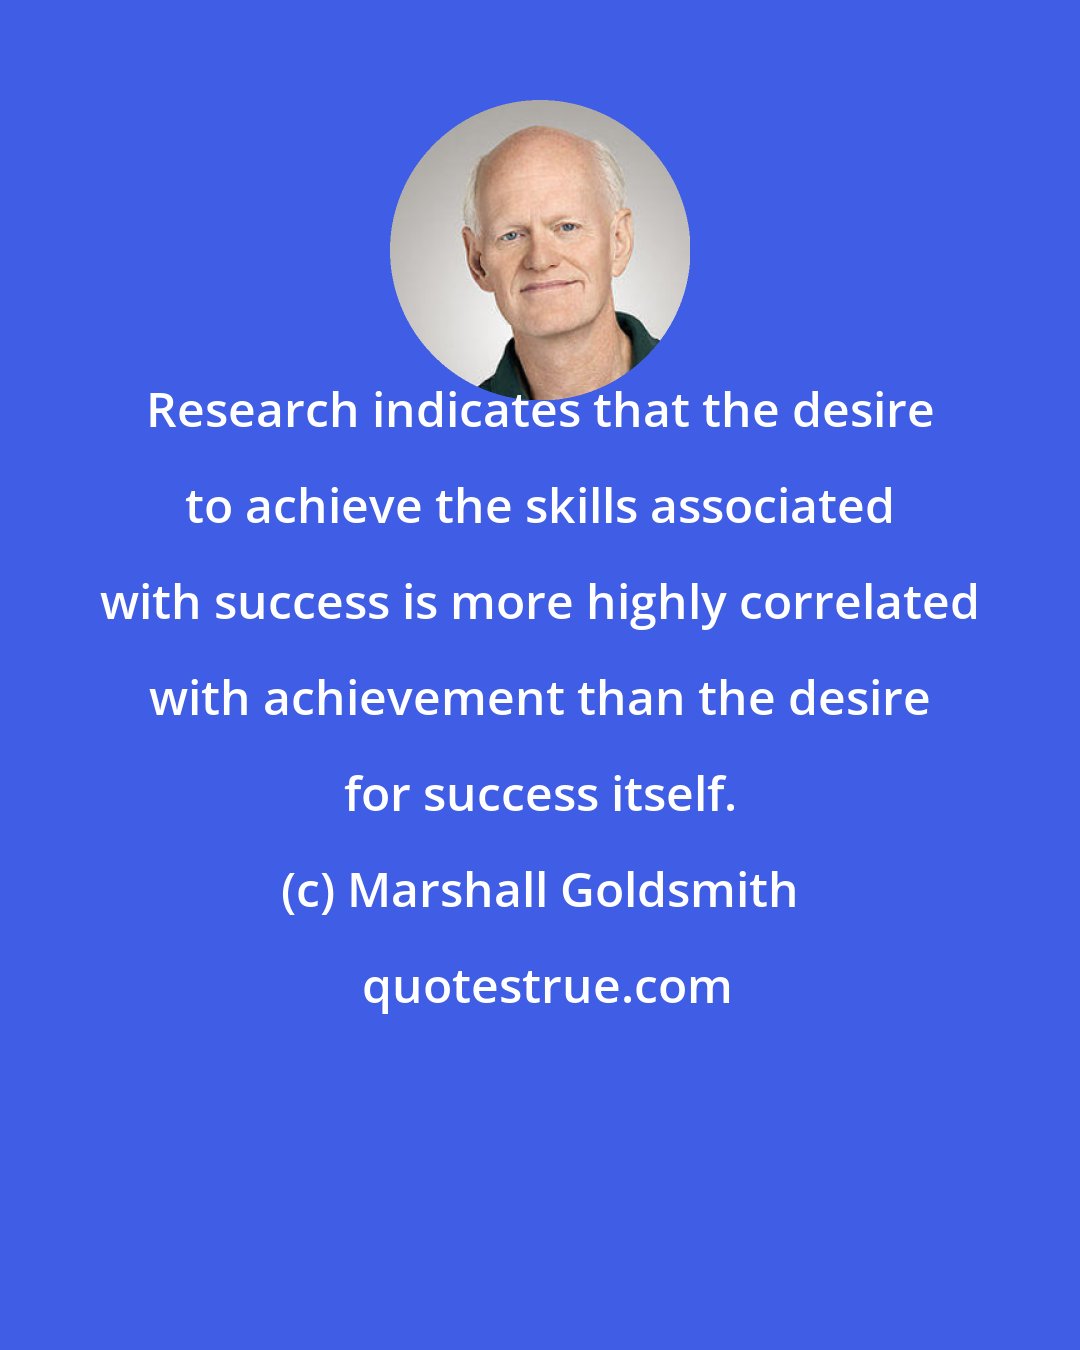 Marshall Goldsmith: Research indicates that the desire to achieve the skills associated with success is more highly correlated with achievement than the desire for success itself.